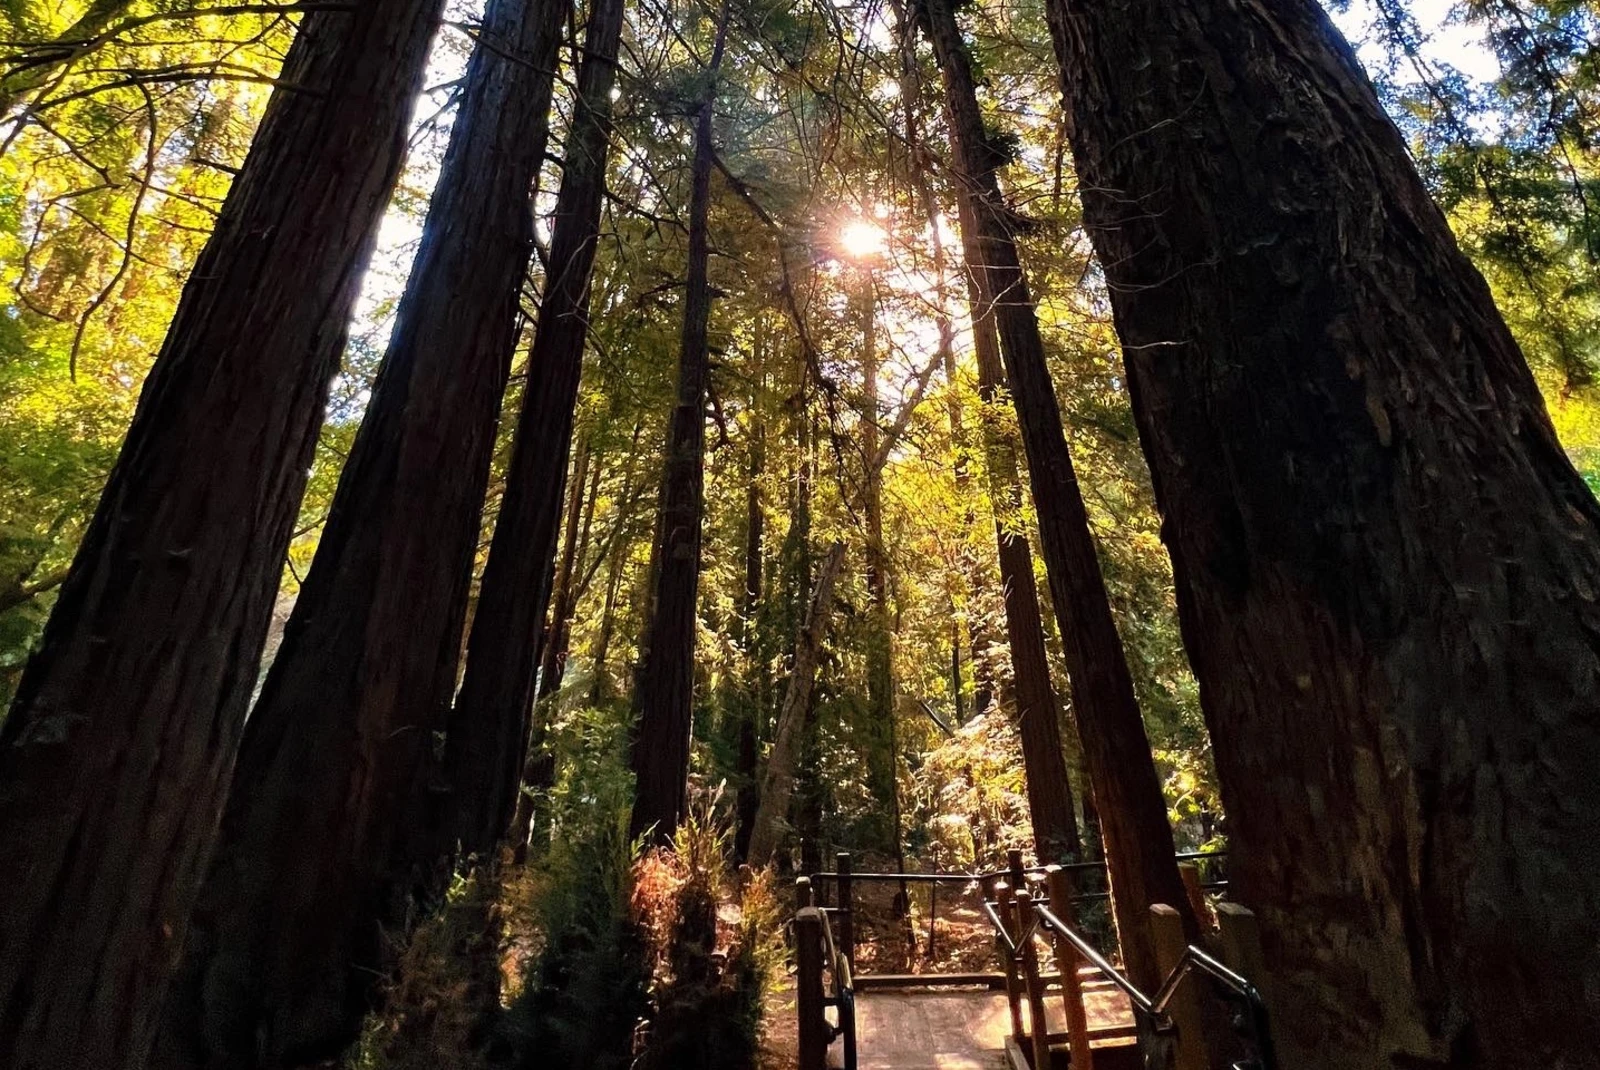 Pfeiffer Big Sur State Park is a rugged haven of natural beauty, where ancient redwoods meet the Pacific coastline in harmonious splendor.